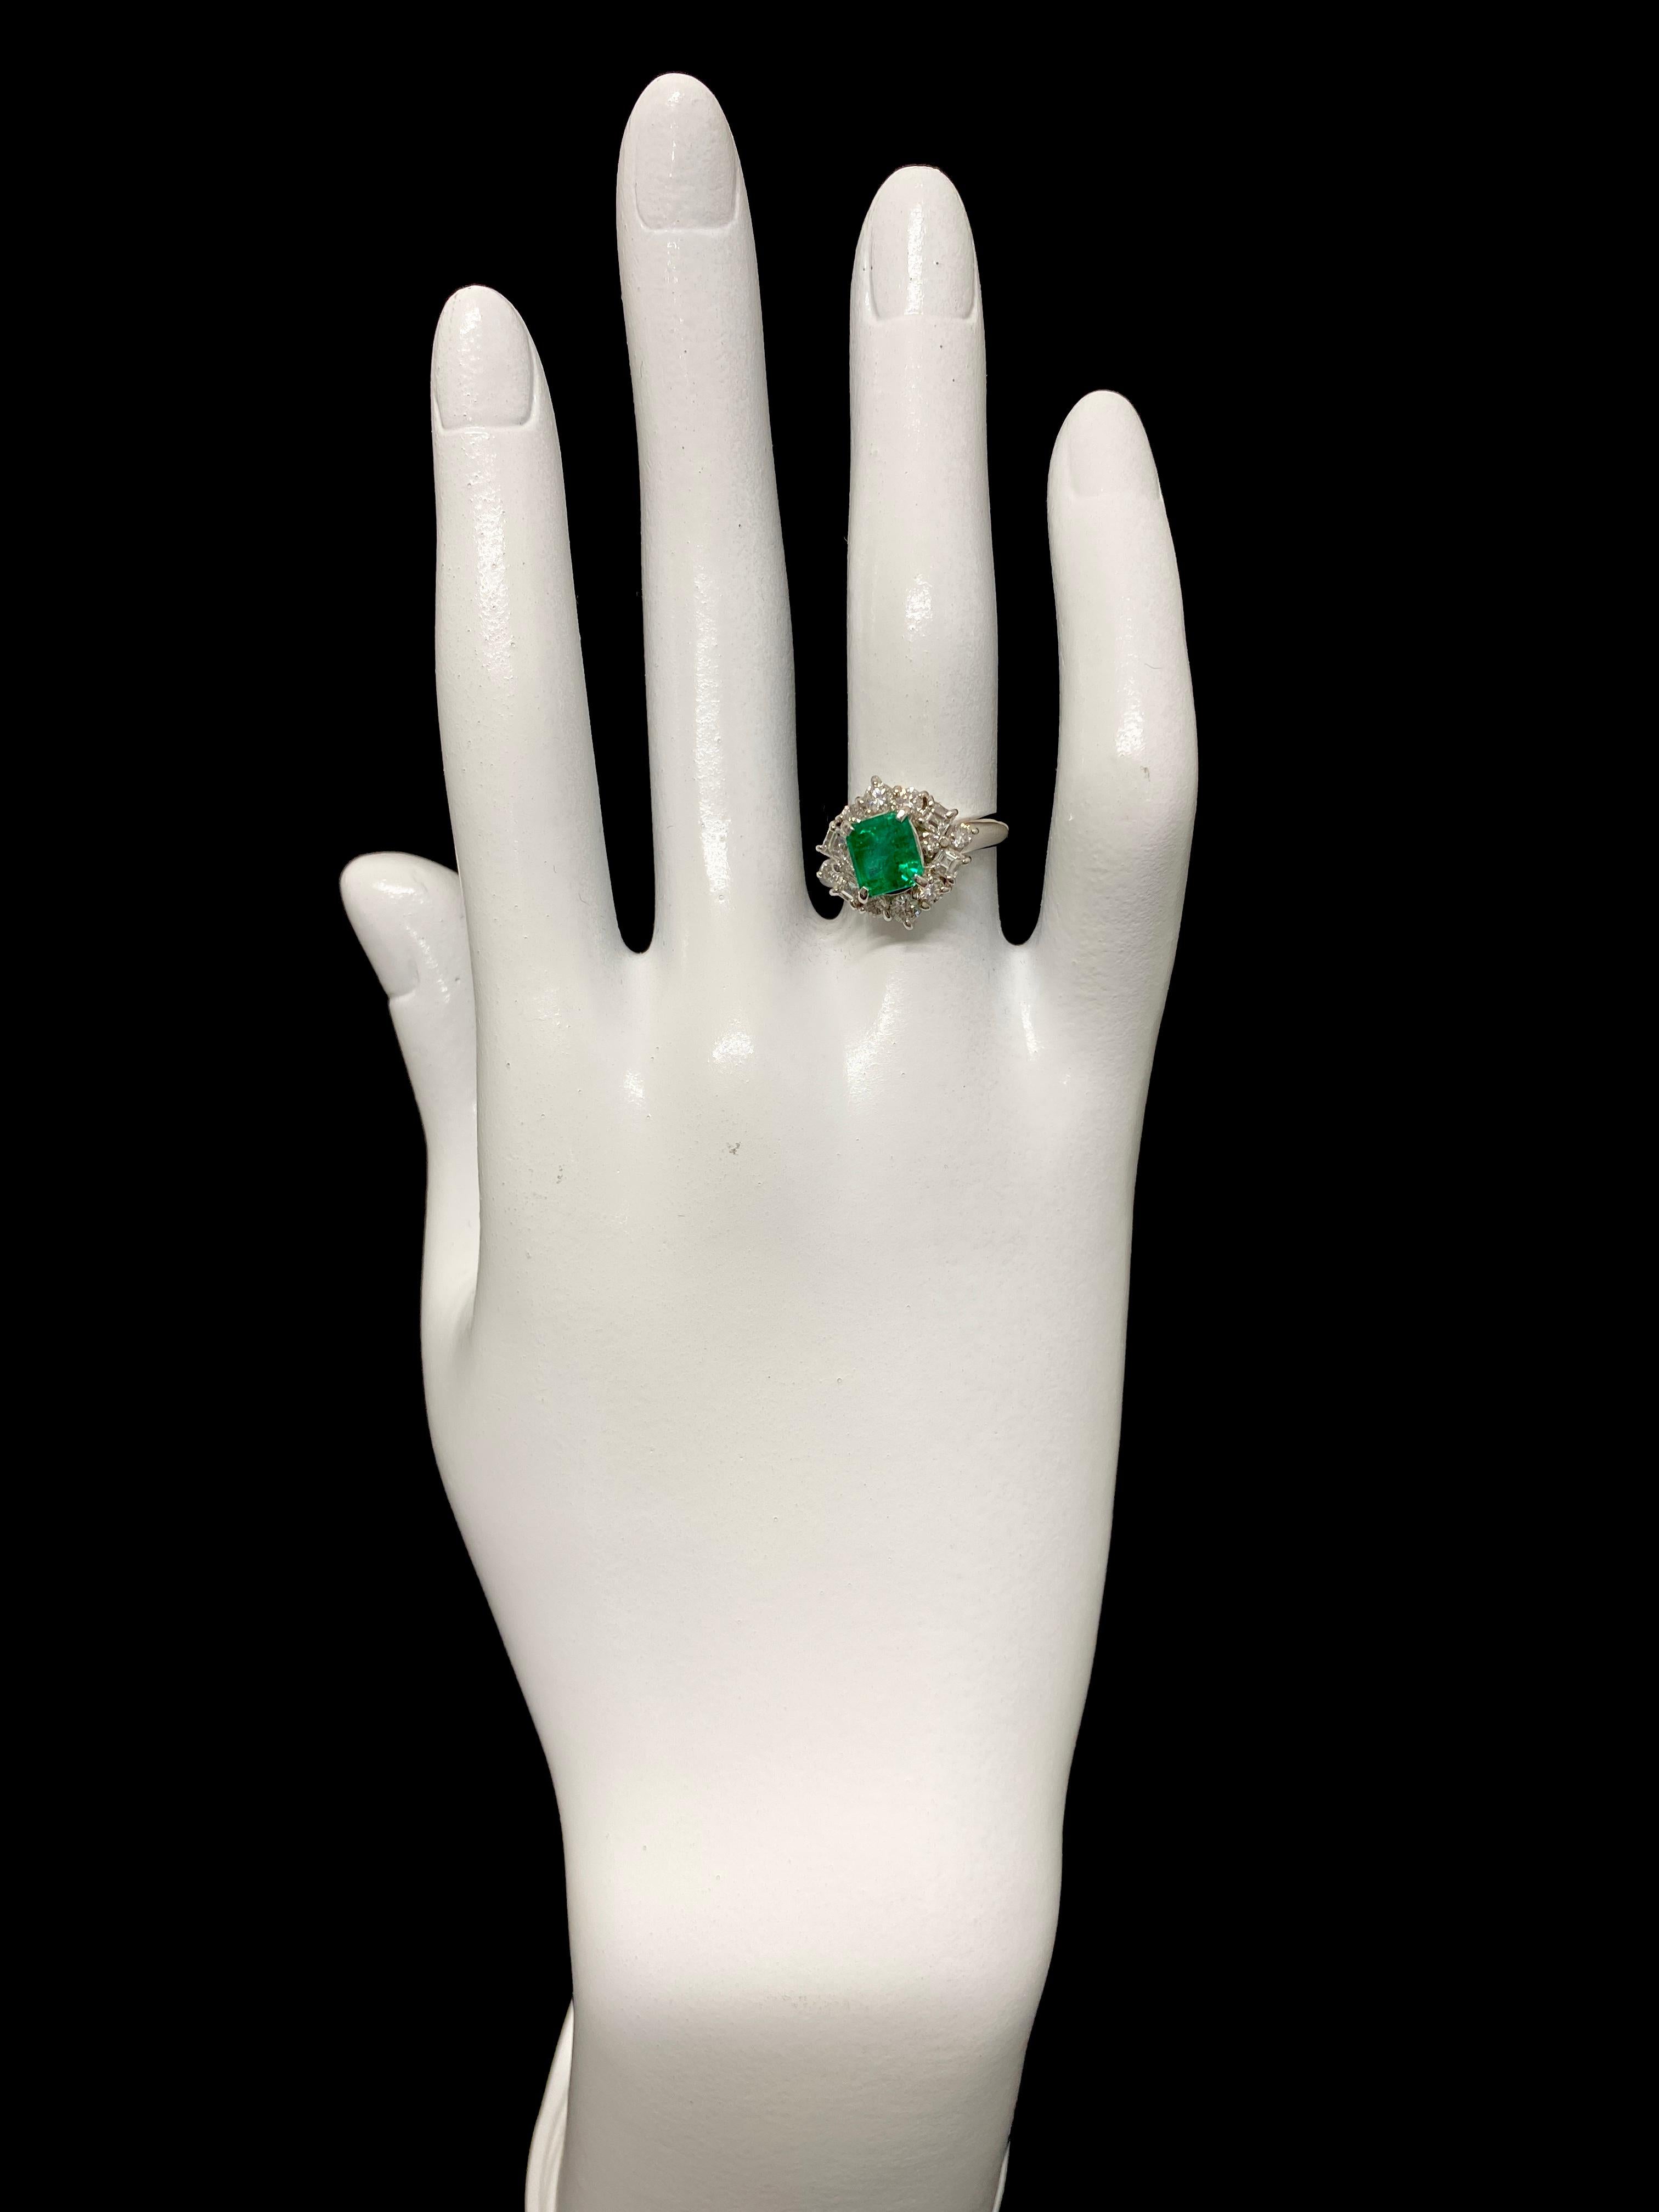 Women's GIA Certified 1.15 Carat Untreated (No Oil) Colombian Emerald Ring in Platinum